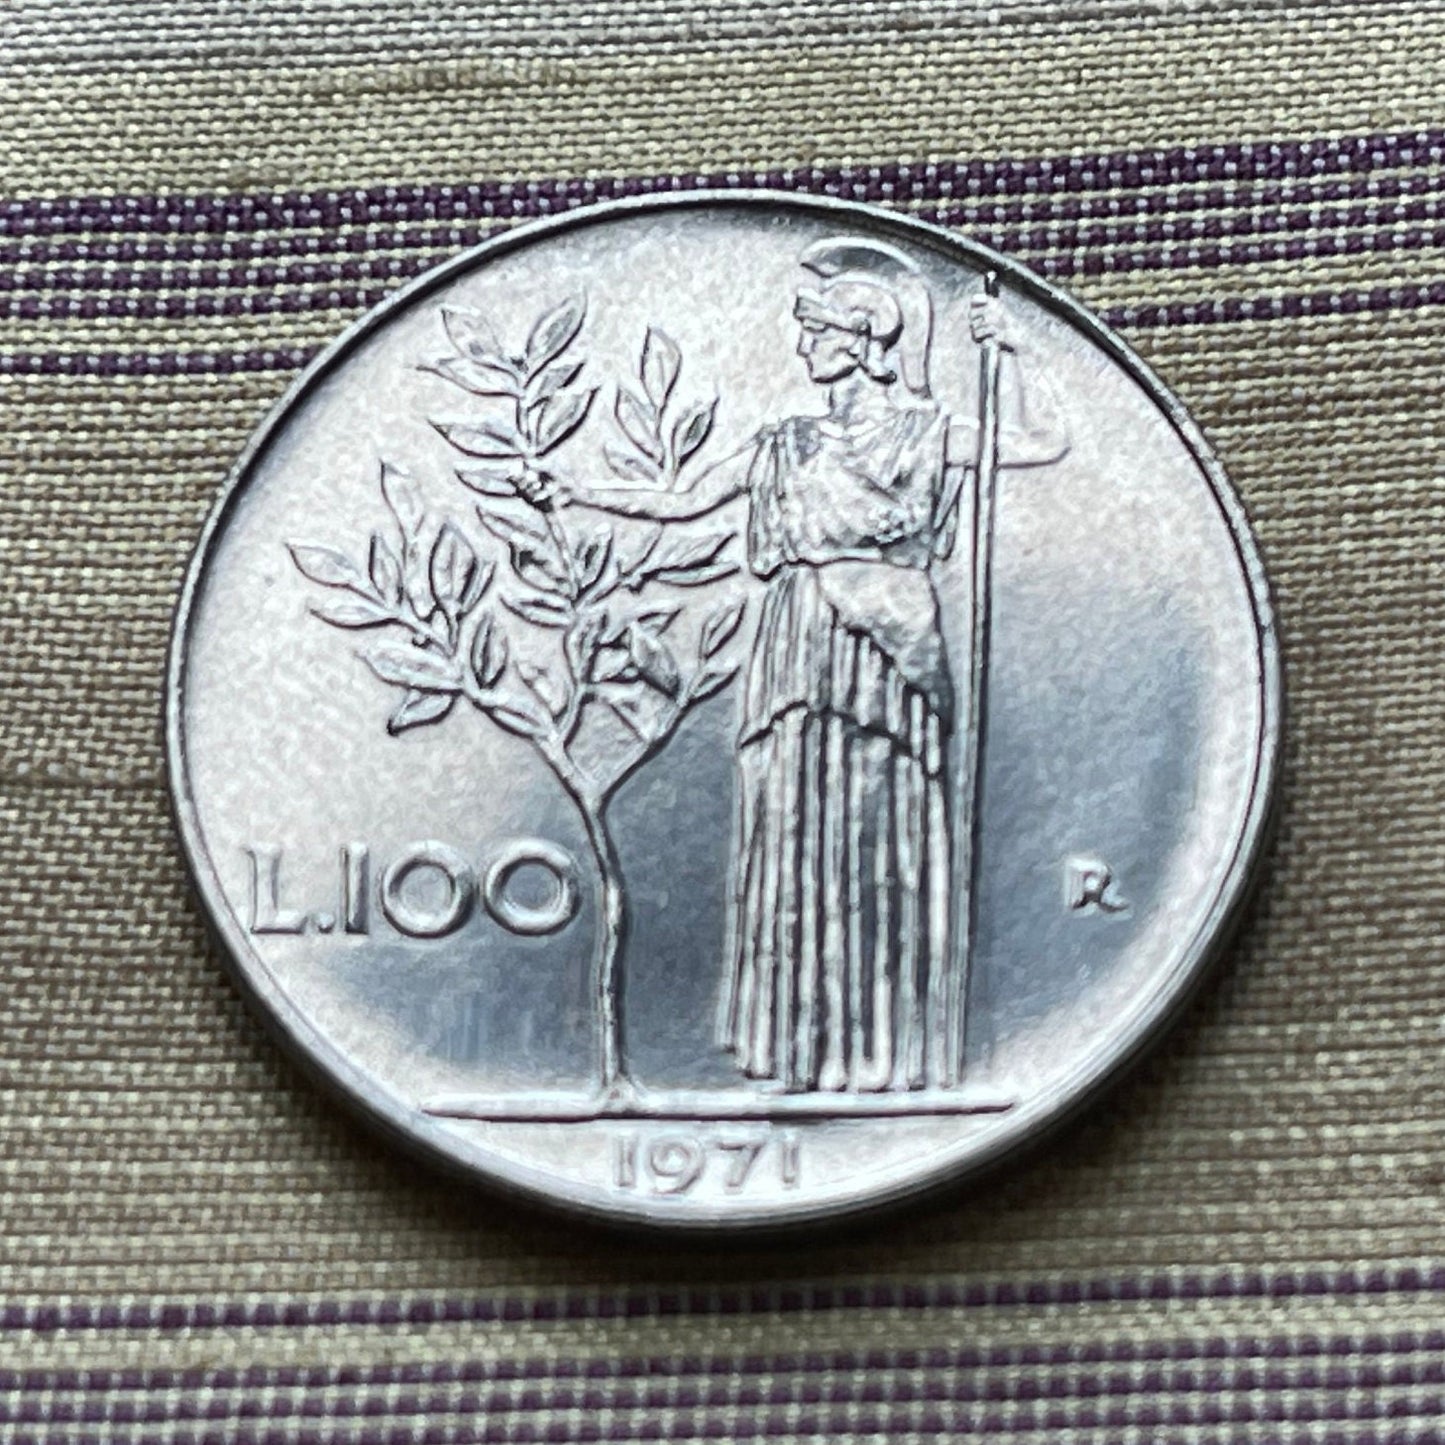 Goddess Minerva & Olive Tree 100 Lire Italy Authentic Coin Money for Jewelry and Craft Making (Goddess Athena)